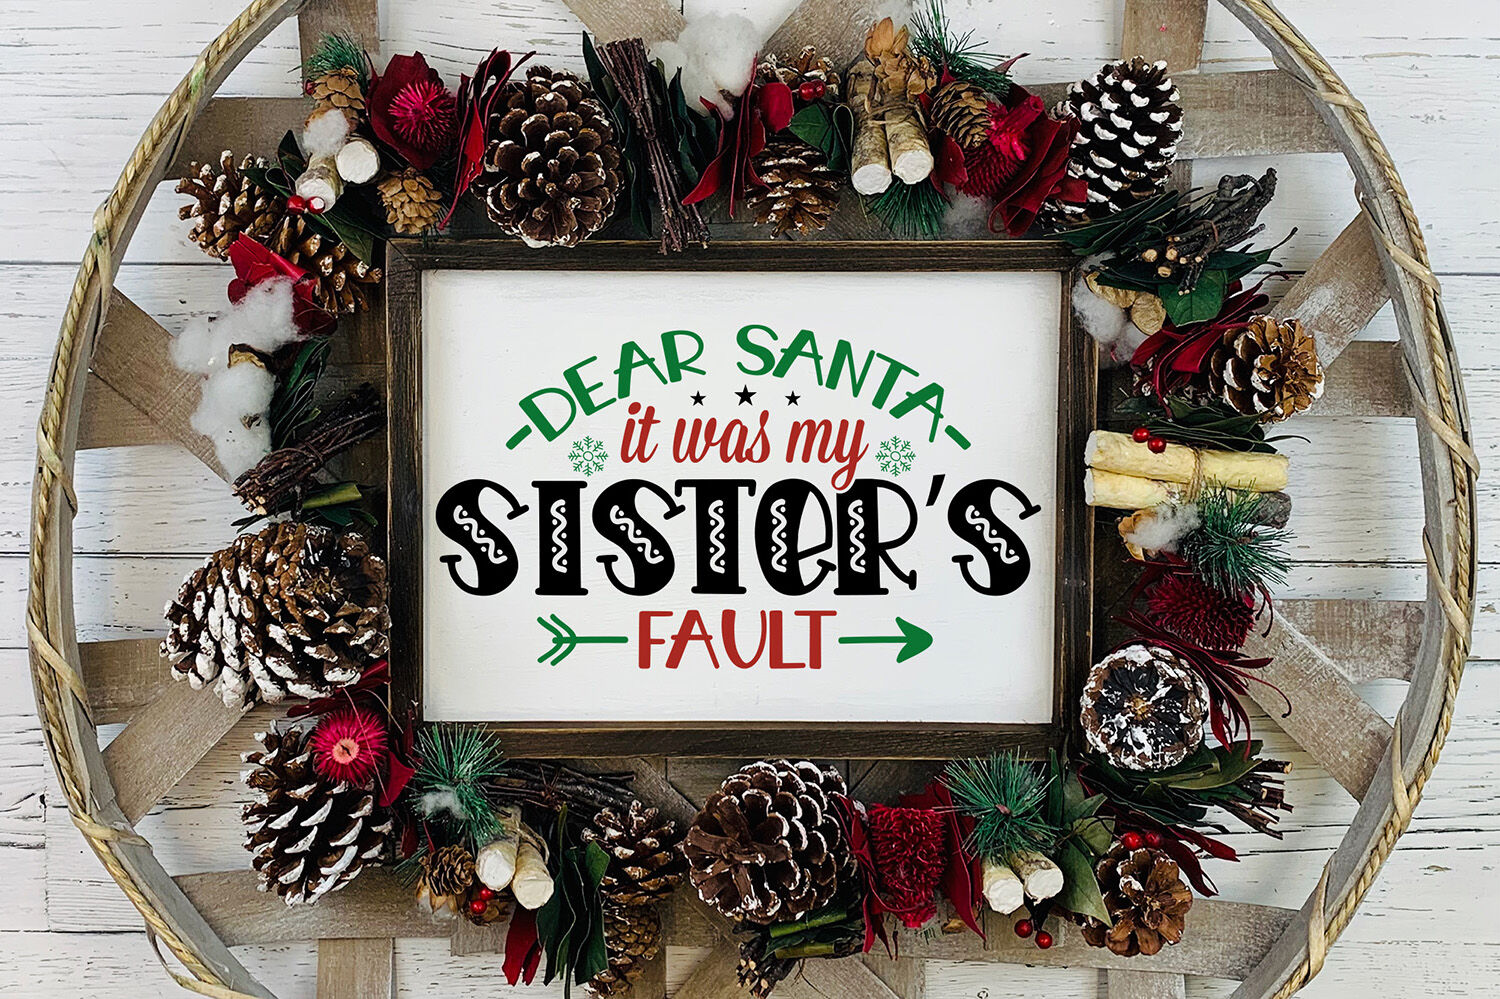 Dear Santa It Was My Sister S Fault Christmas Svg Dxf Png By Craftlabsvg Thehungryjpeg Com